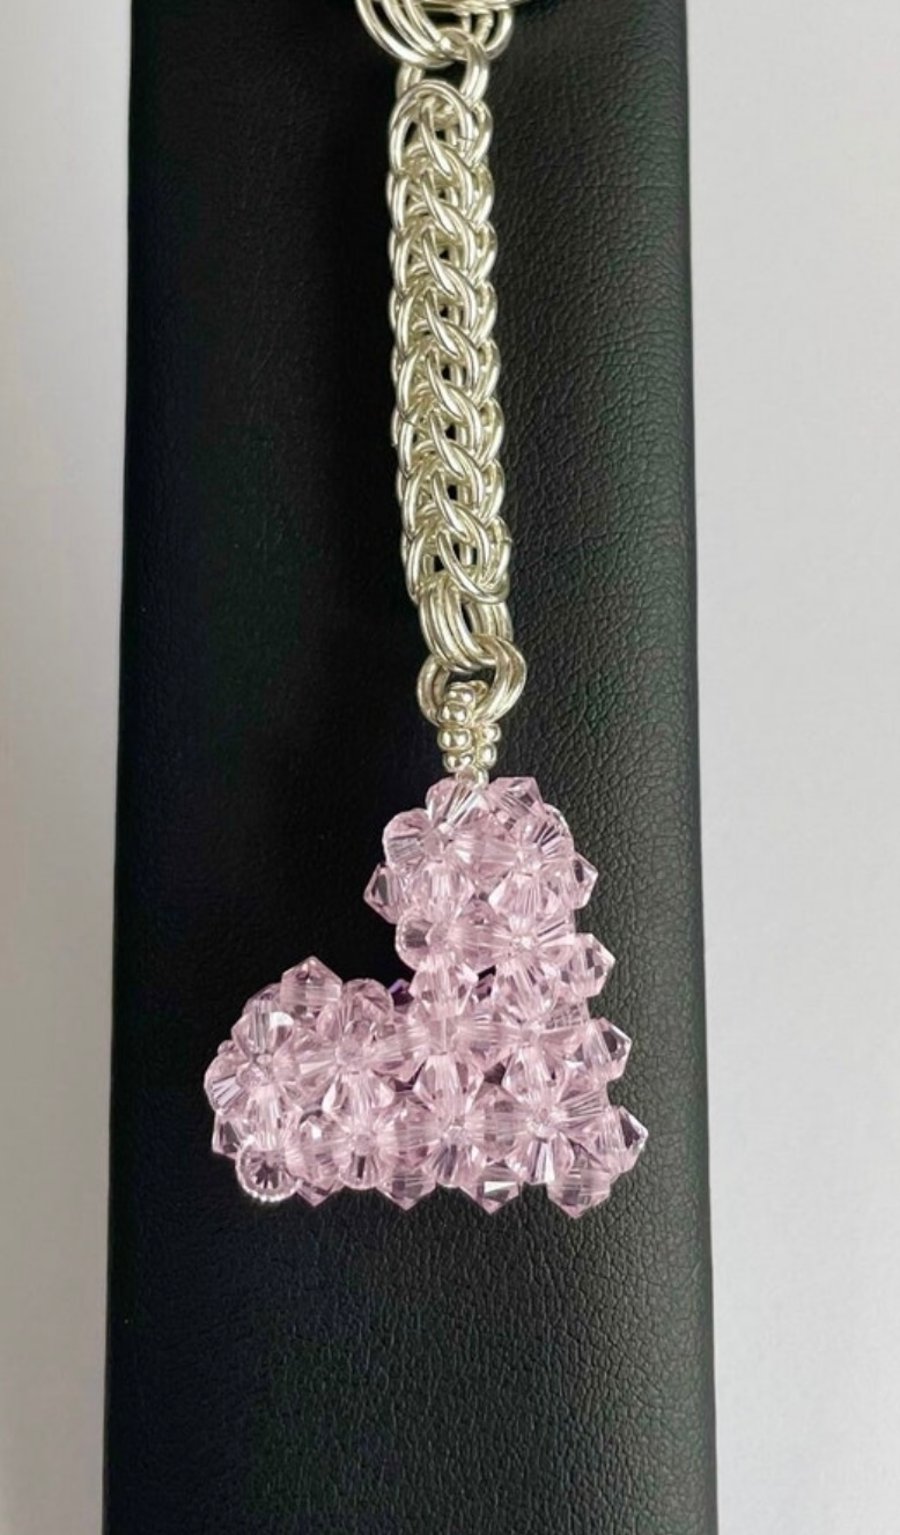 Handbag Charm, Pink Crystal Puffed Heart, with a Chainmaille Chain and Keyring